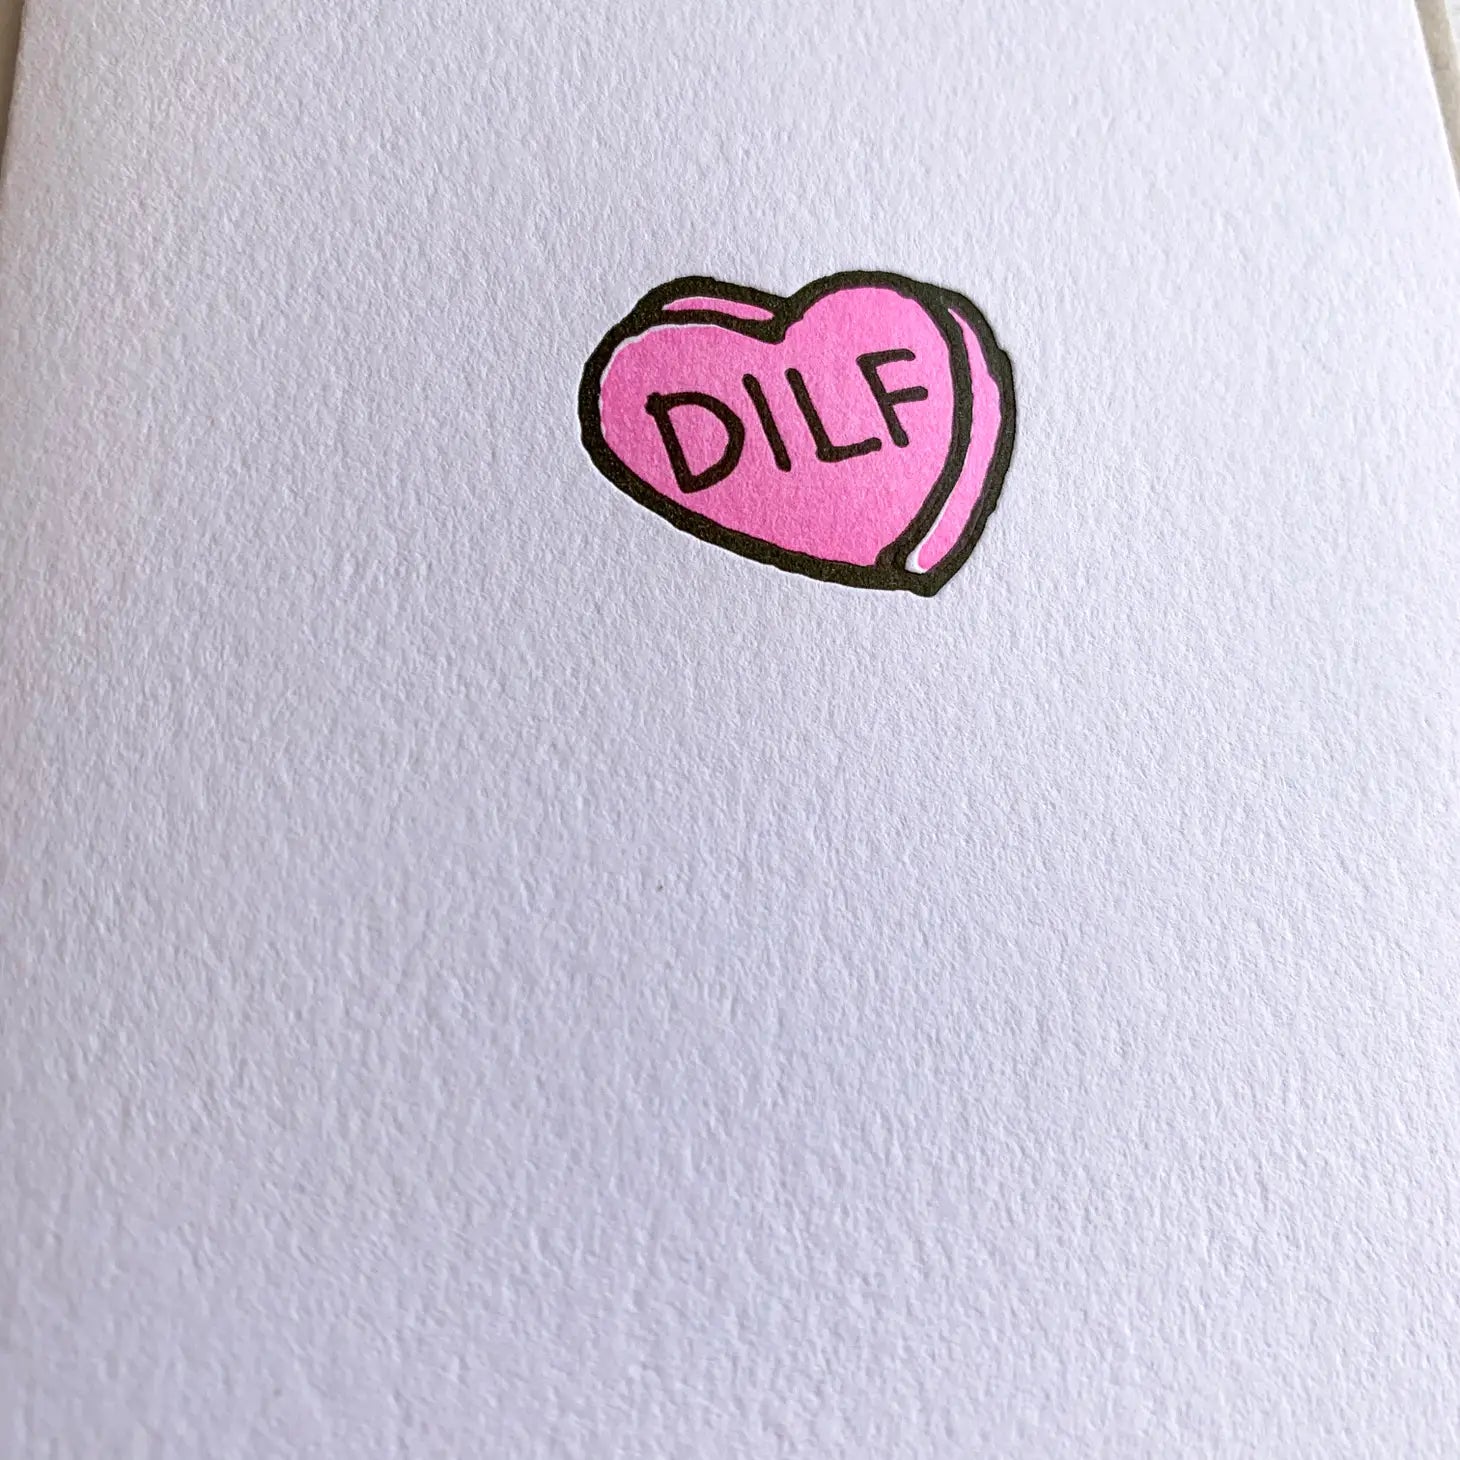 DILF Candy Heart - Valentine's Day Card